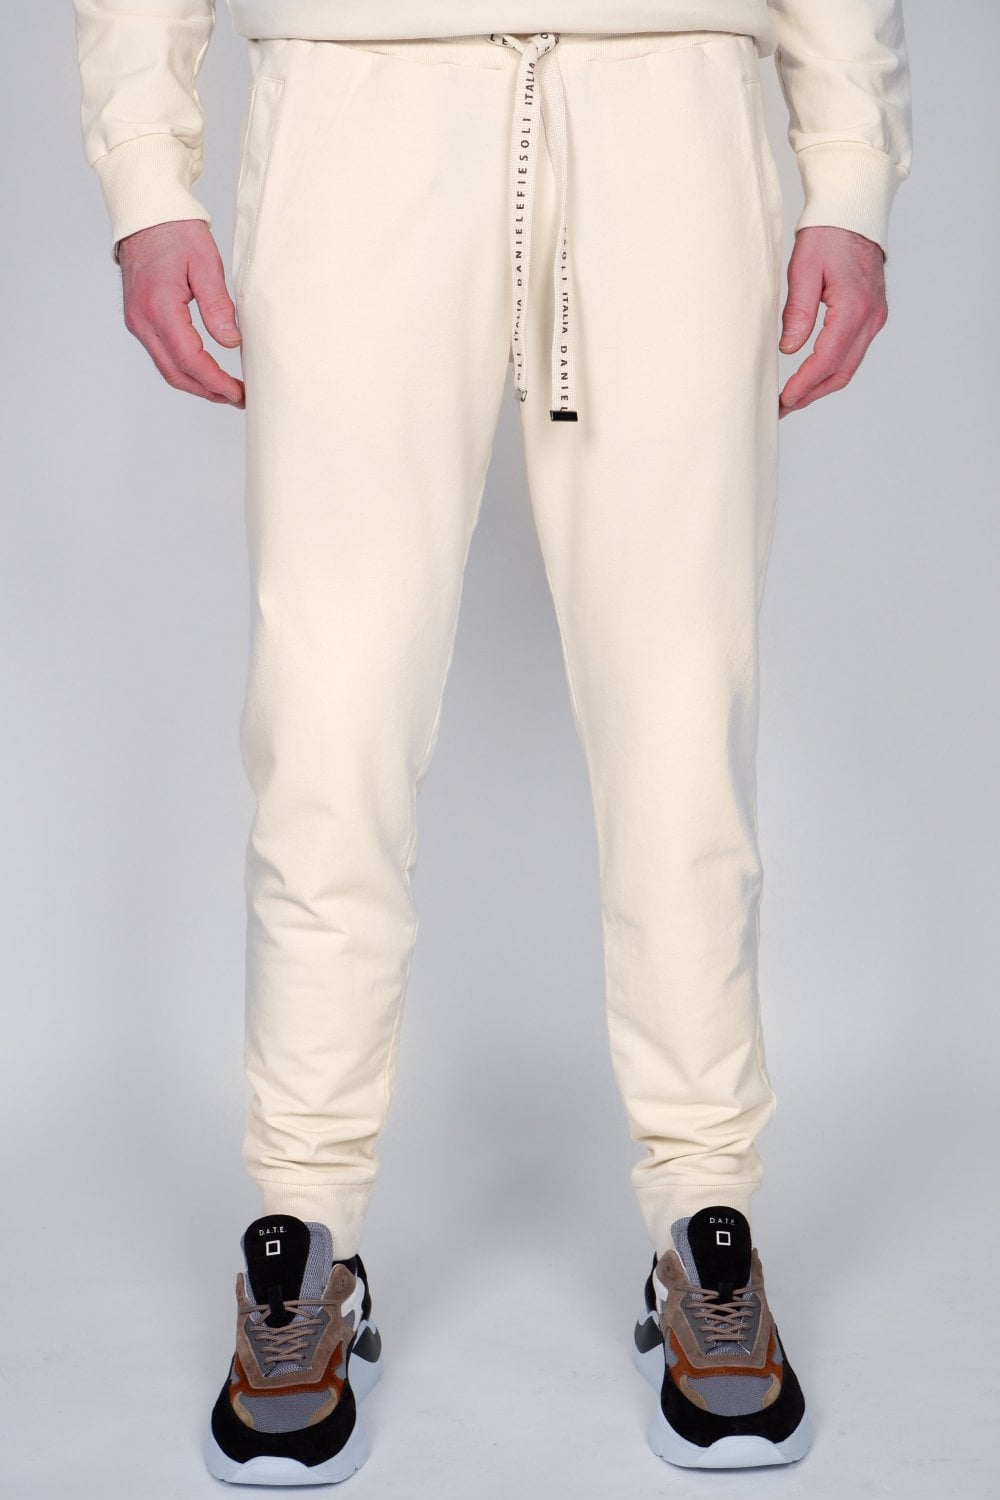 Buy the Daniele Fiesoli Jersey Joggers Off White at Intro. Spend £100 for free next day UK delivery. Official stockists. We ship worldwide